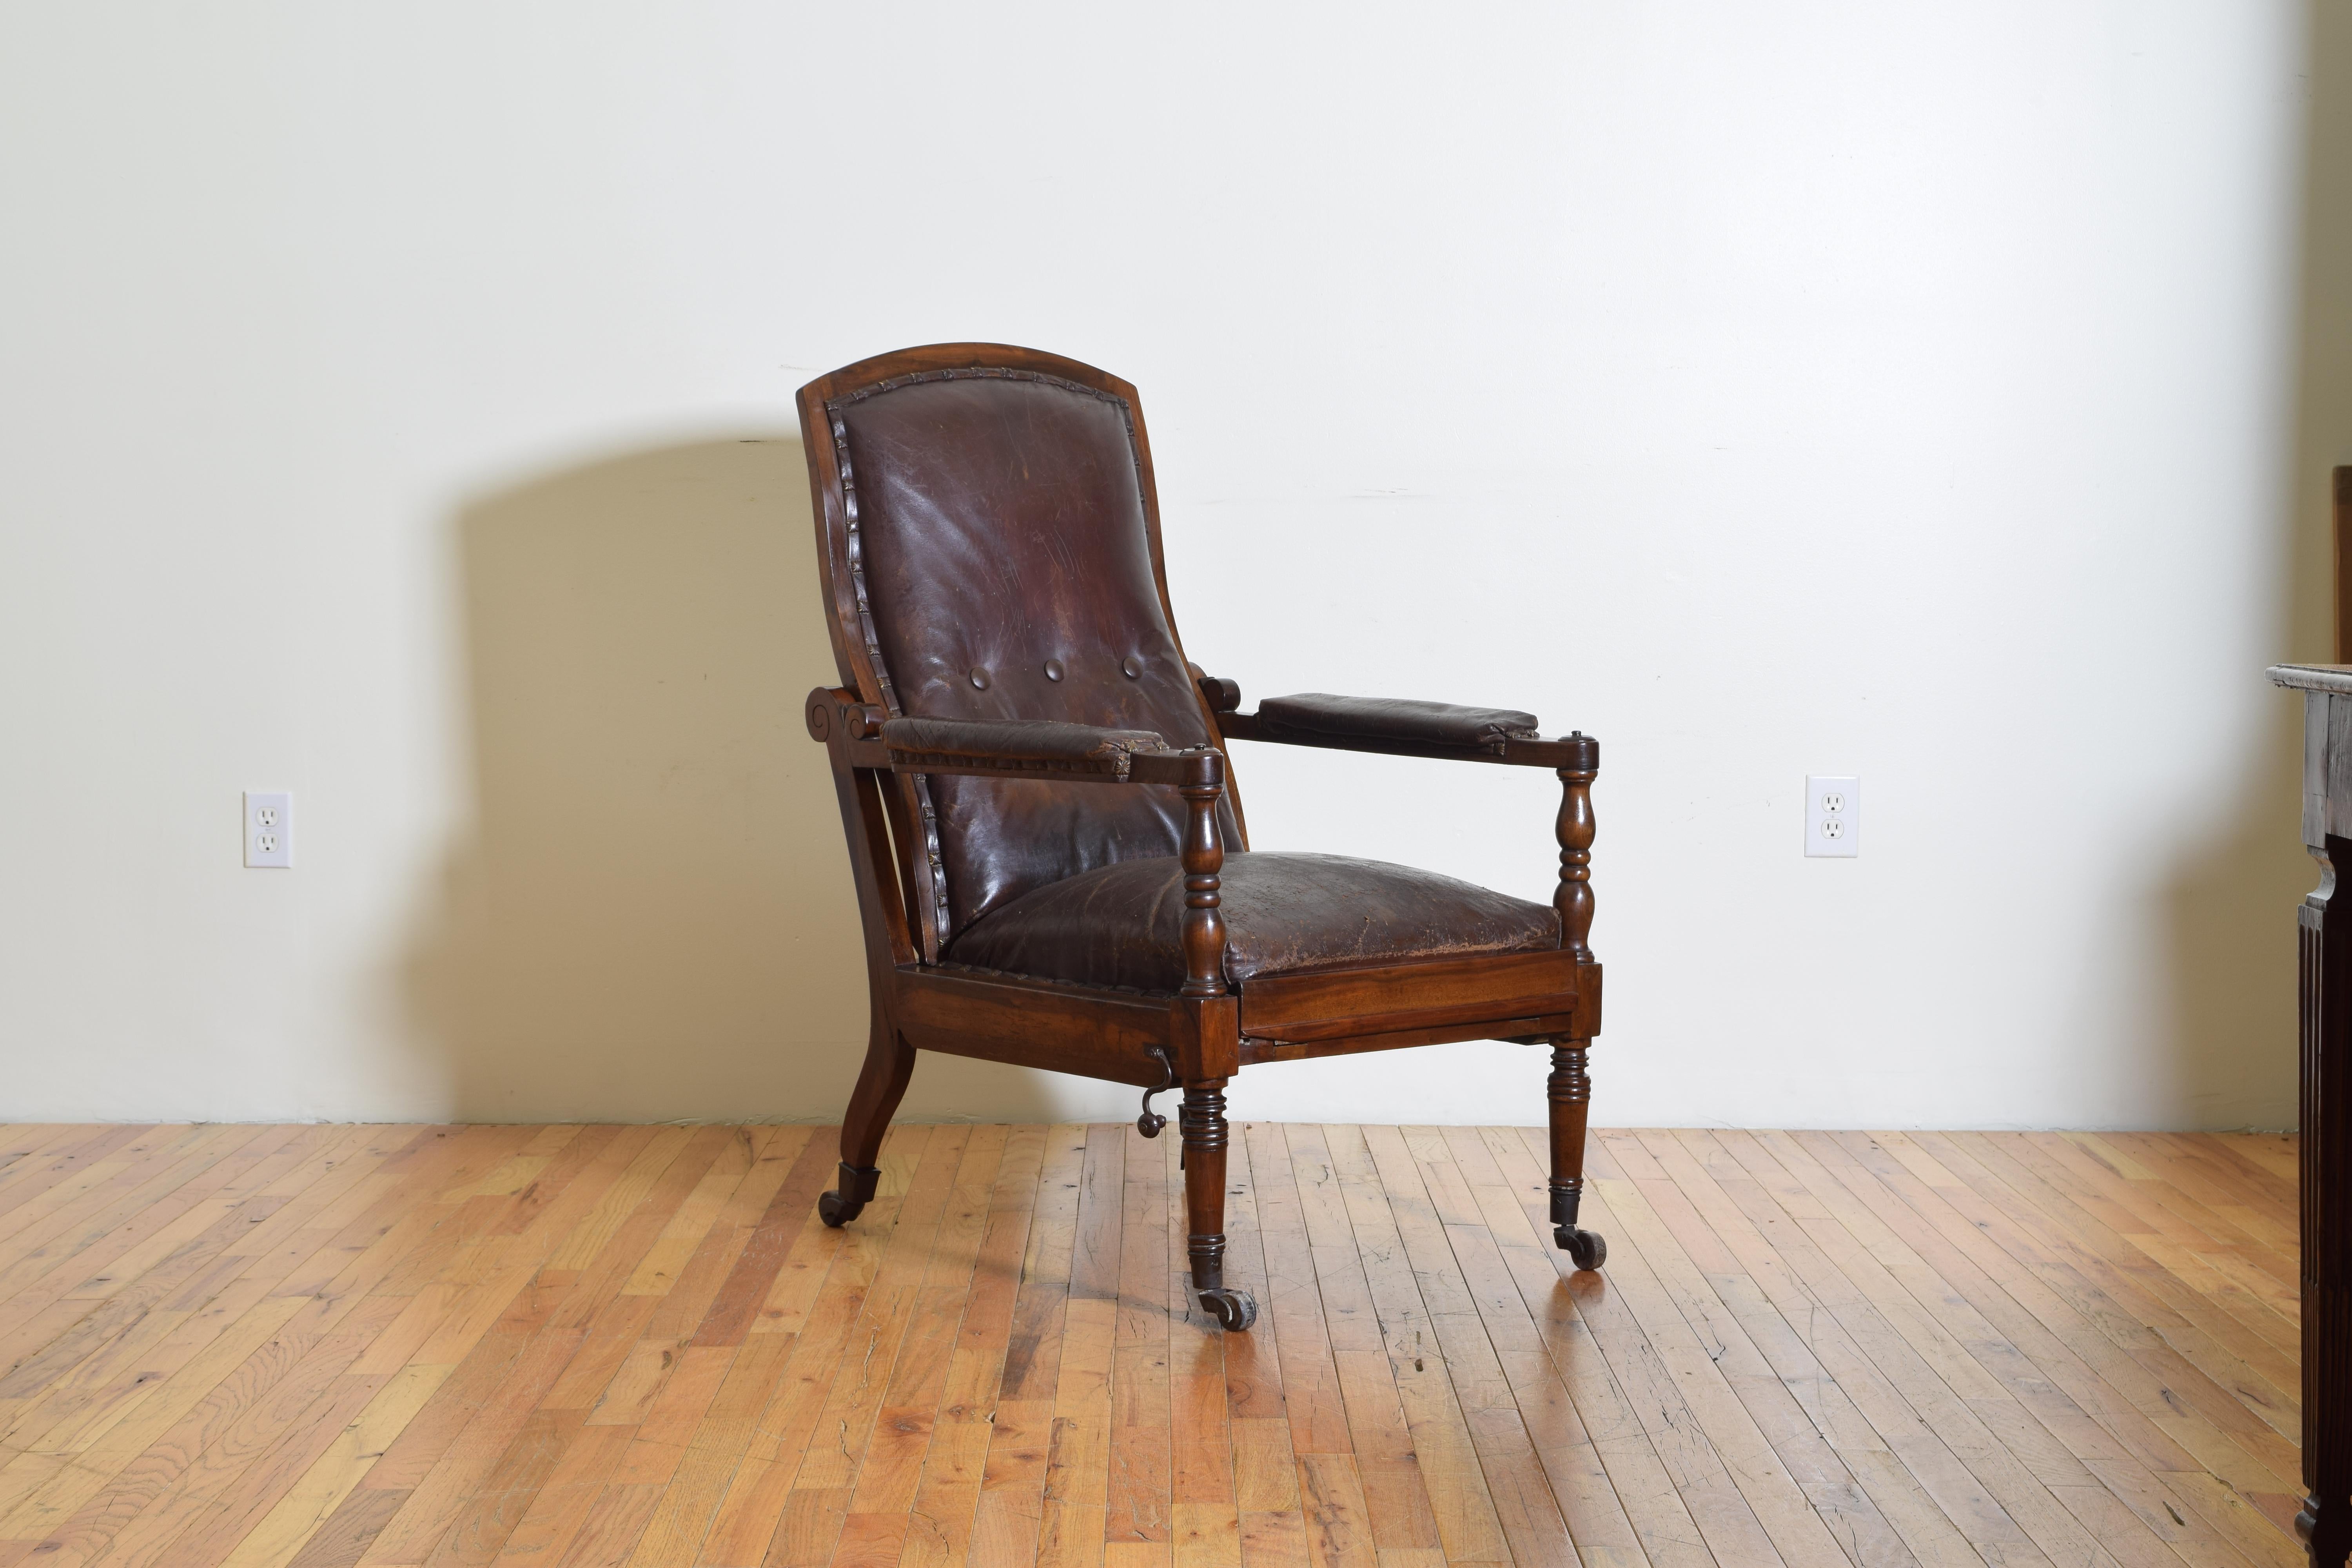 The chair having an arched backrest upholstered in button tufted brown leather, the armrests also with leather cushions and turned supports, the seat of tightly upholstered in leather, raised on splayed back and turned front legs, all atop brass and